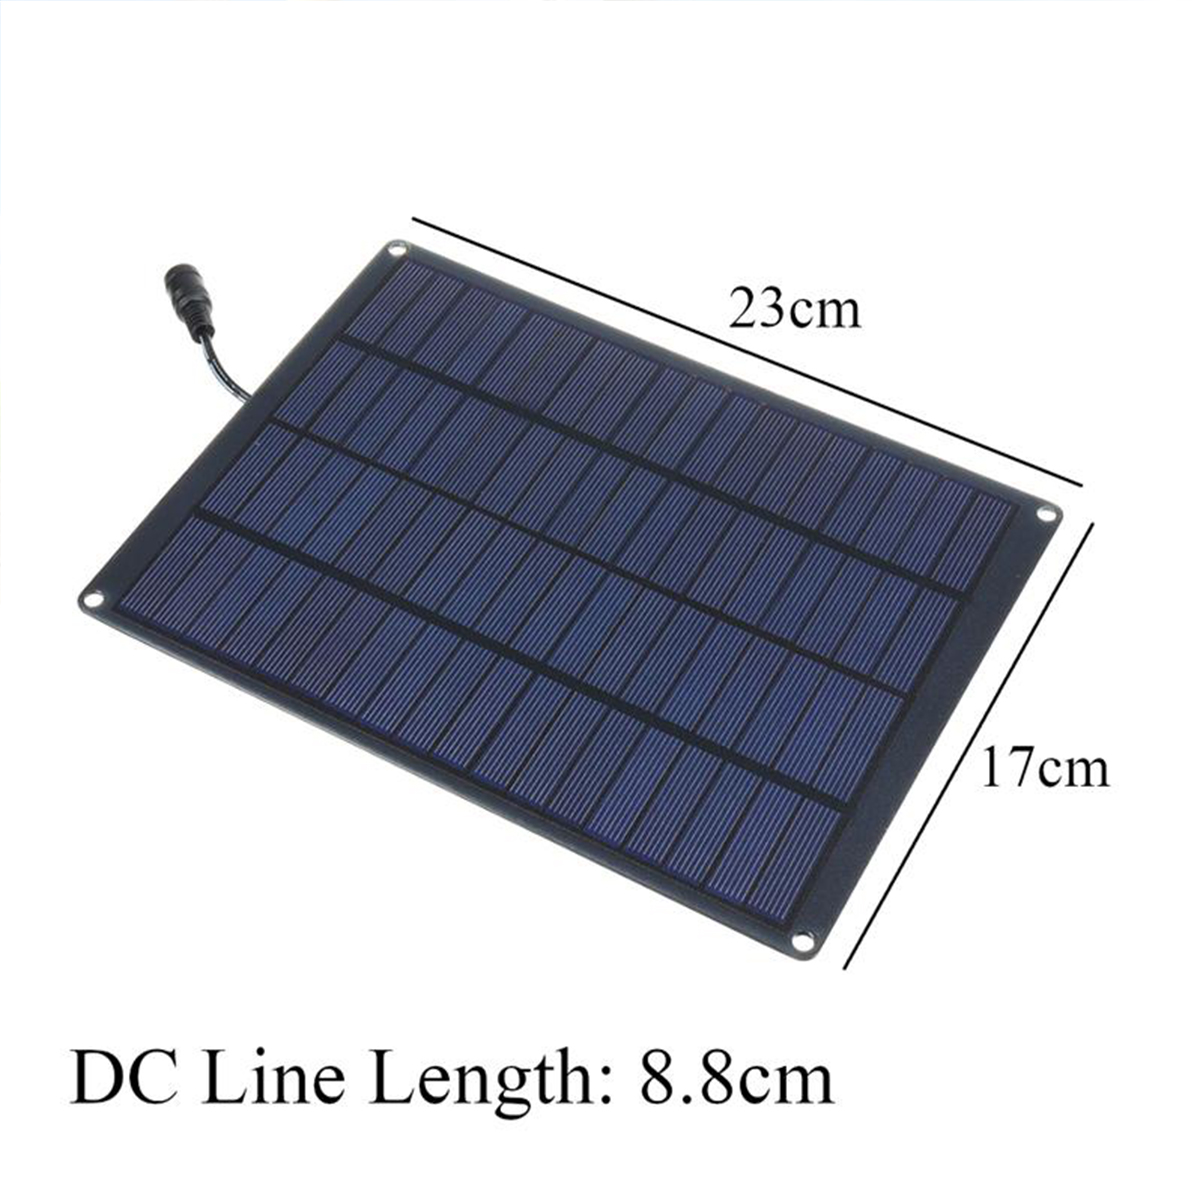 55W-12V-Durability-Waterproof-Monocrystalline-Silicon-Solar-Panel-for-Outdoor-CyclingHikingCampingTr-1565726-2